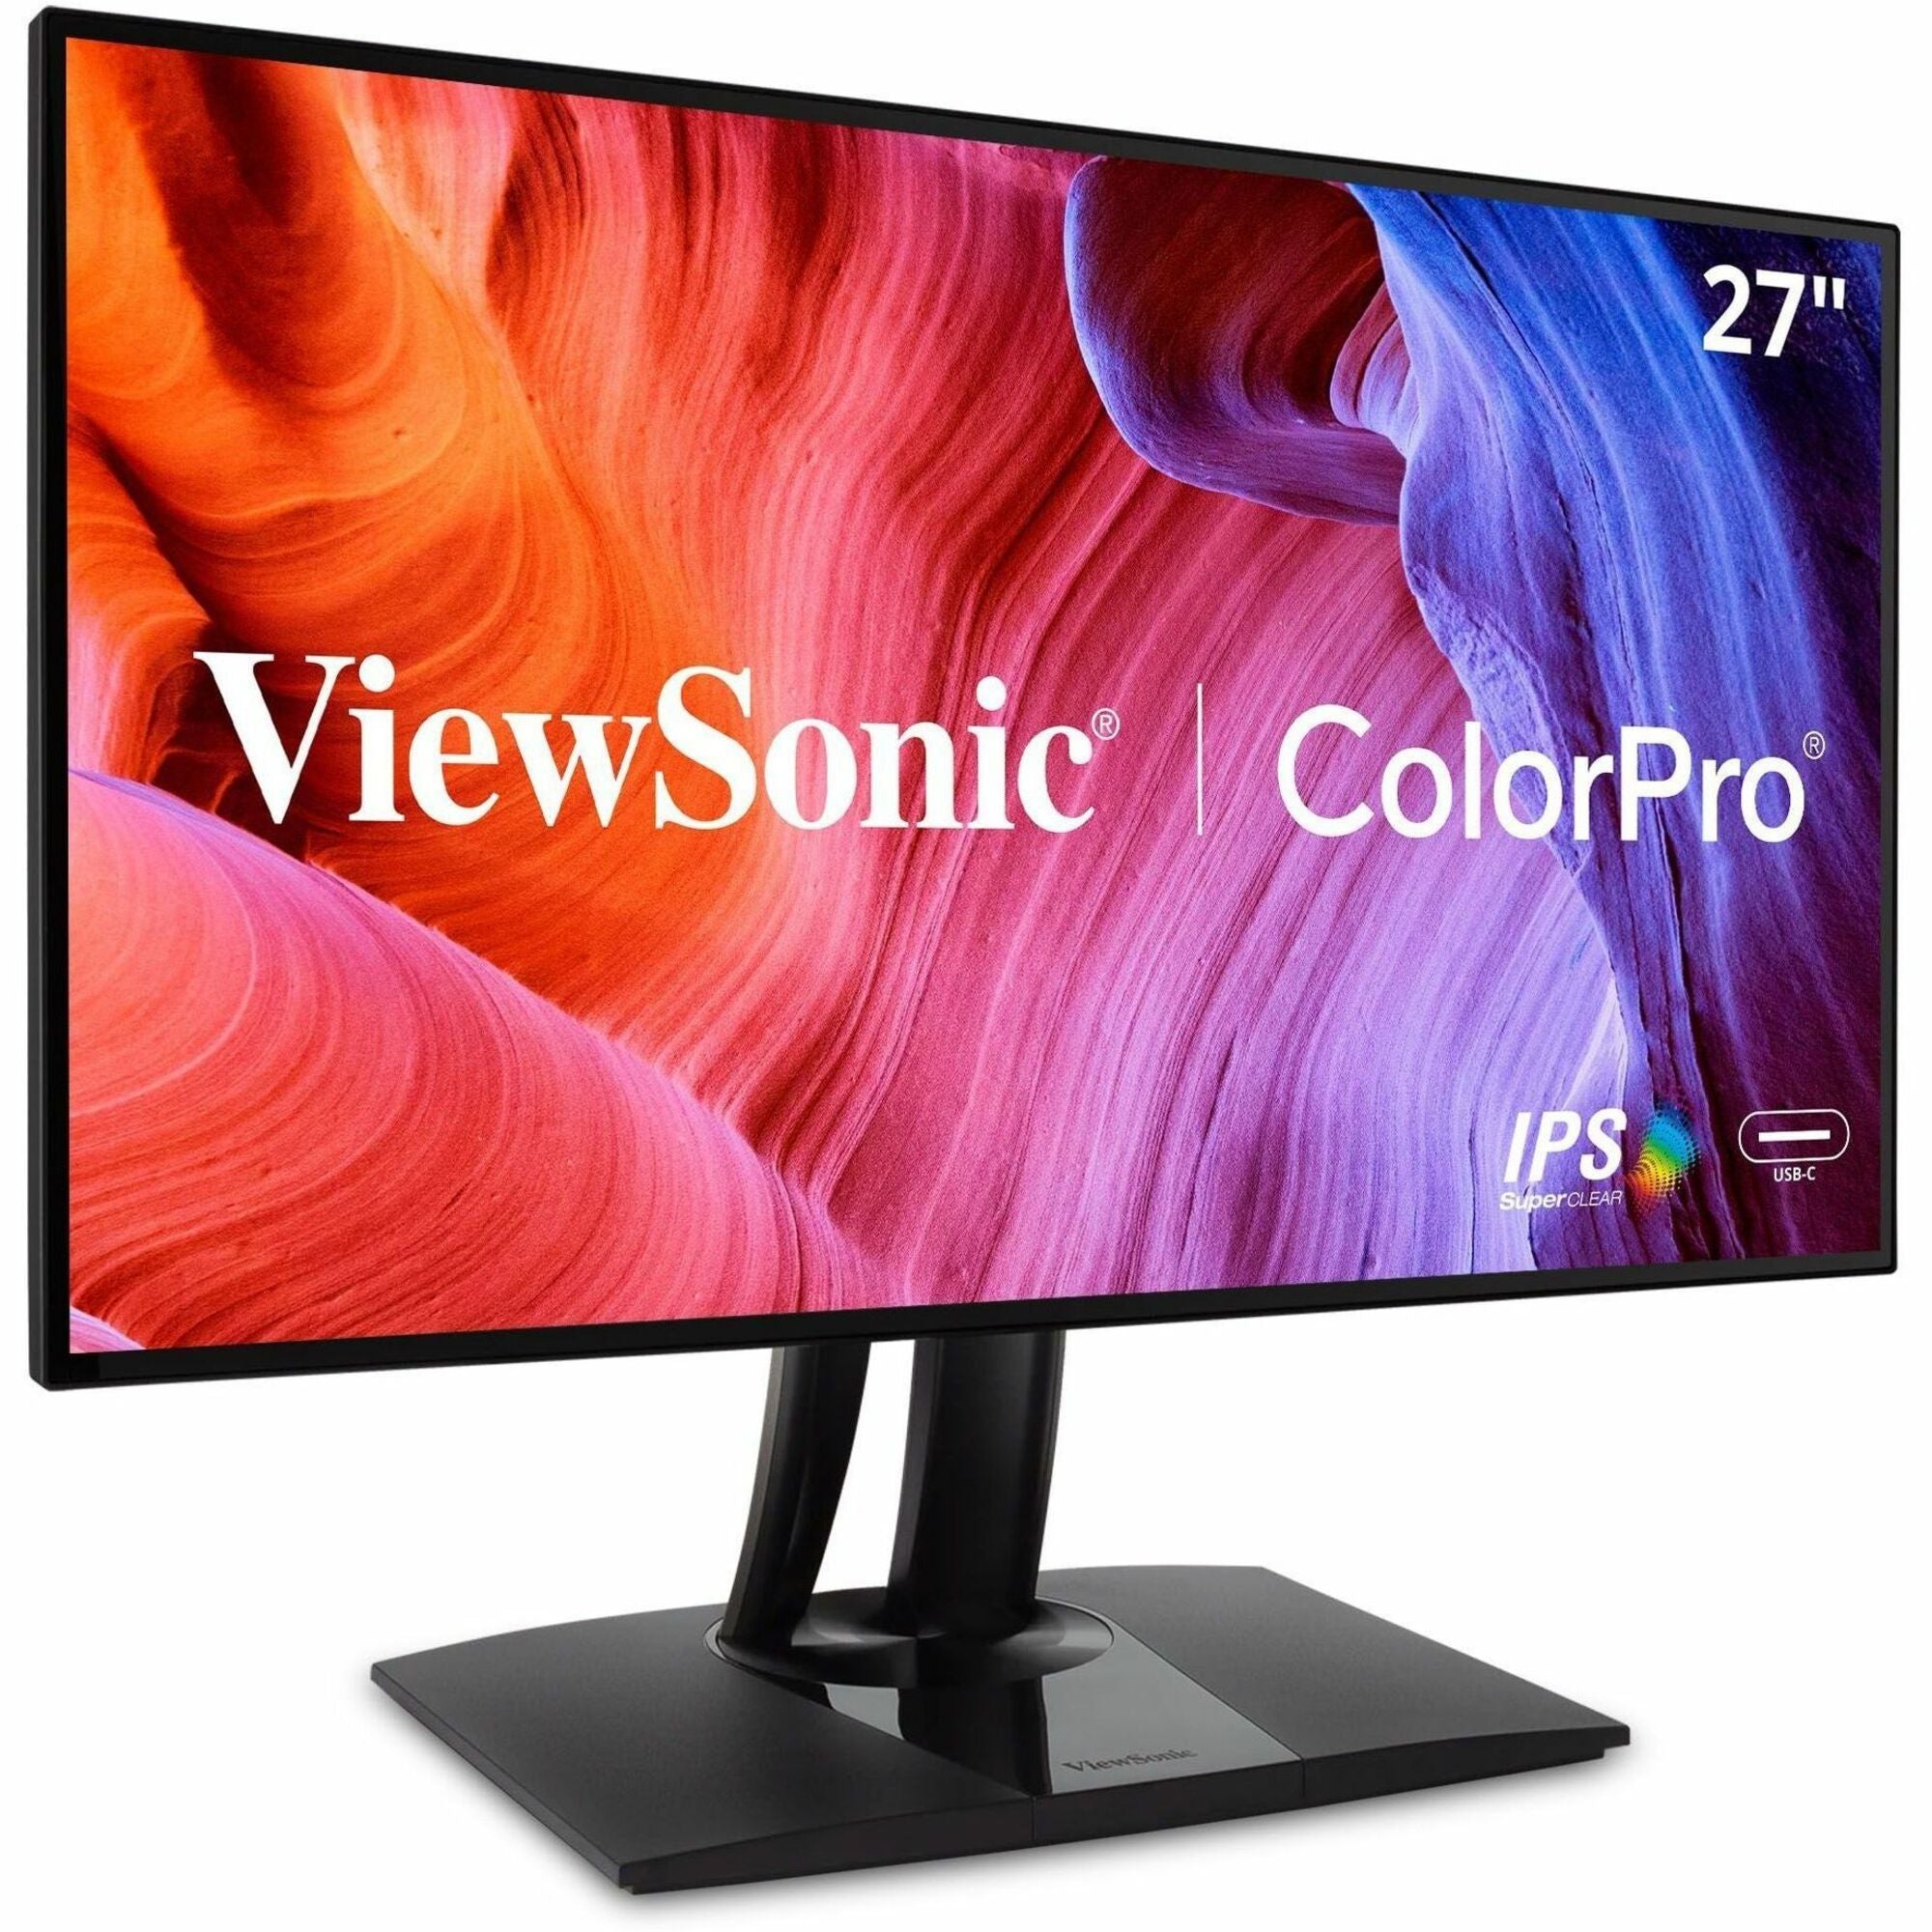 ViewSonic VP2768a 27-Inch Premium IPS 1440p Monitor with Advanced Ergonomics, ColorPro 100% sRGB Rec 709, 14-bit 3D LUT, Eye Care, 90W USB C, RJ45, HDMI, Daisy Chain for Home and Office - VP2768a